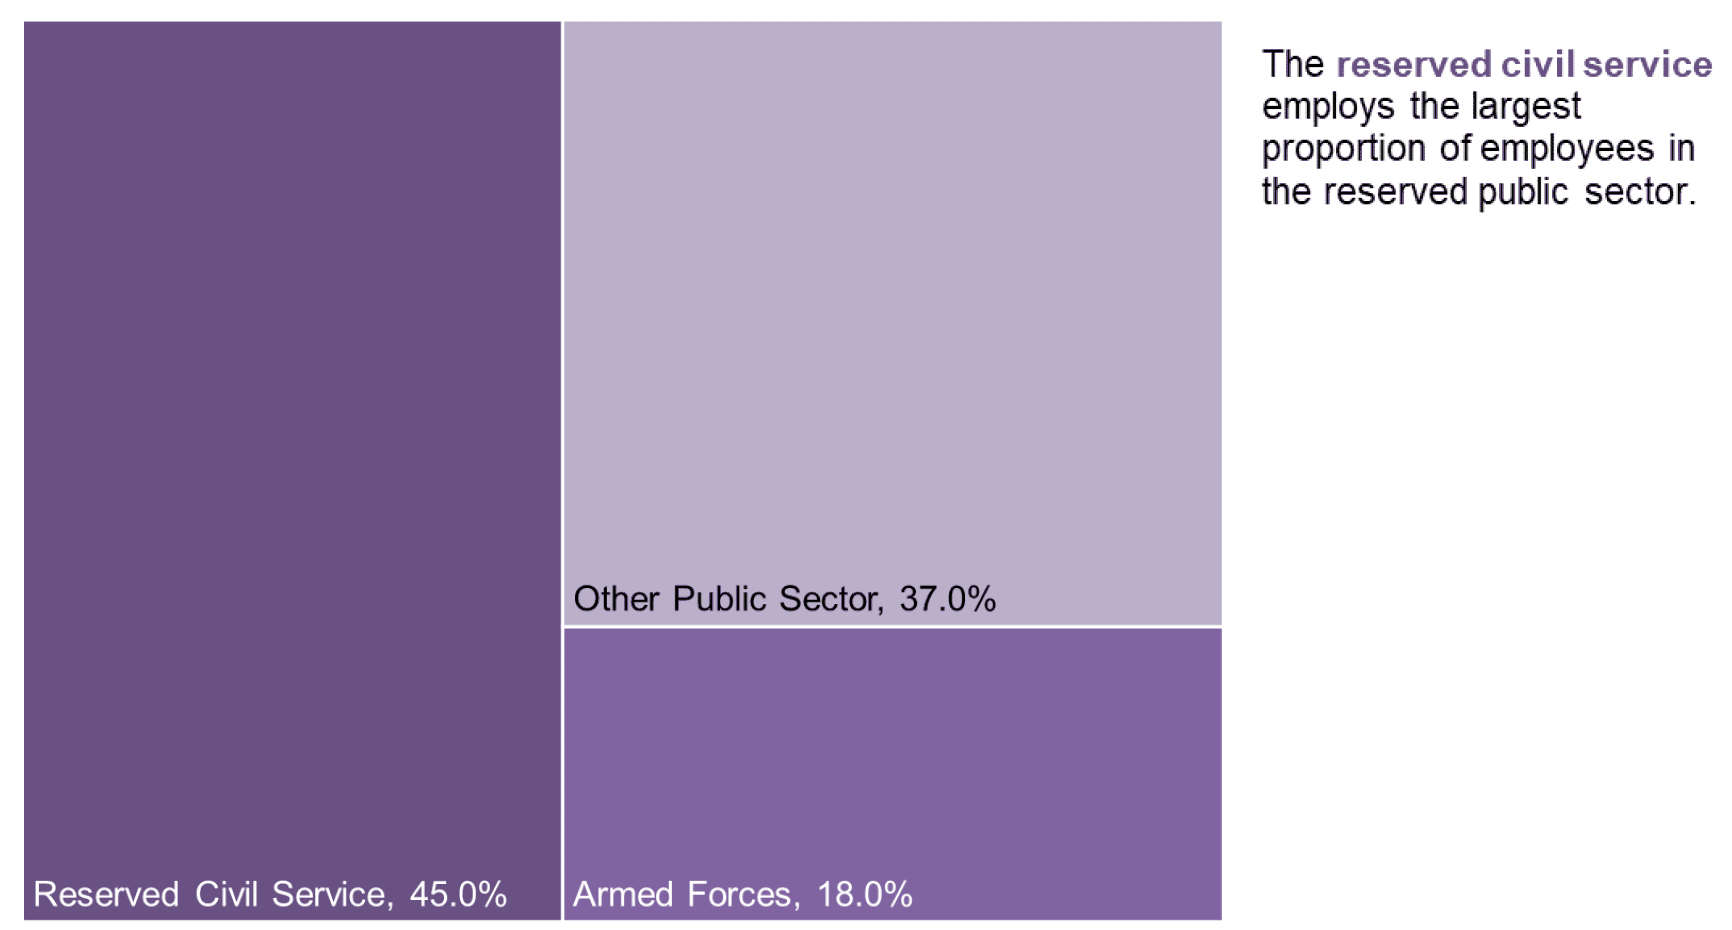 Chart 5 tree map of reserved Public Sector Employment showing relative size of public bodies 